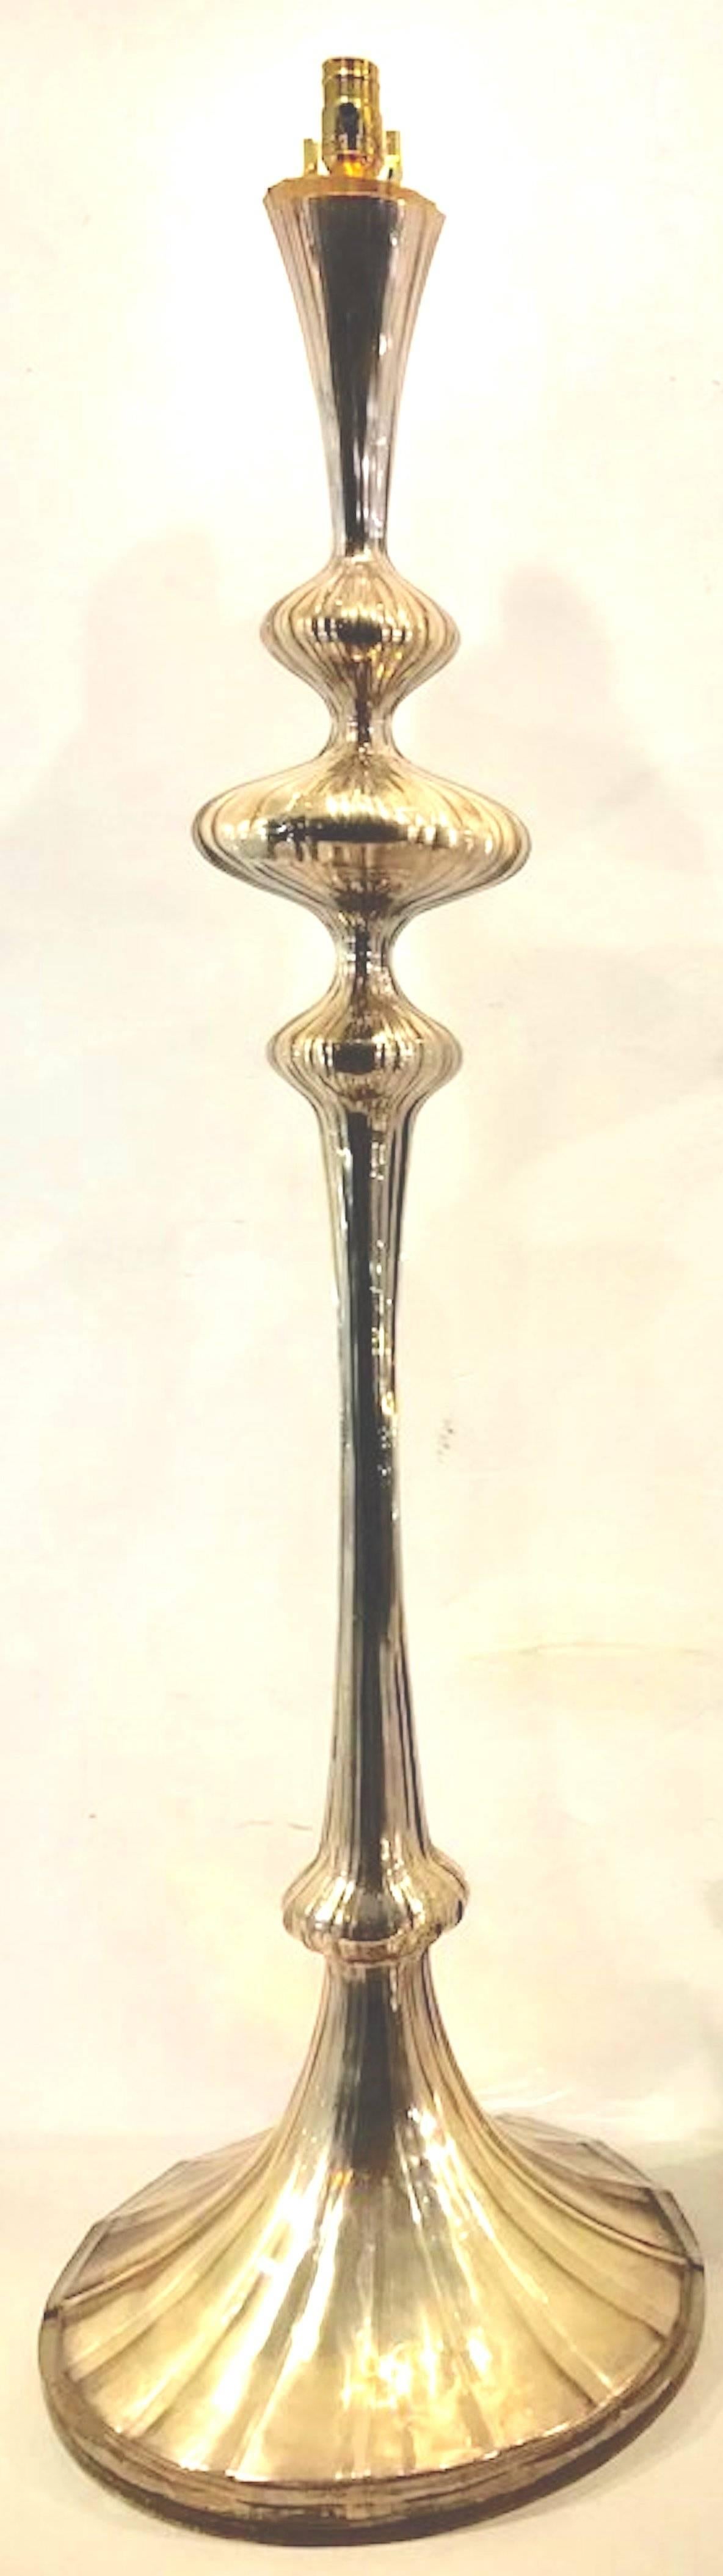 A Mercury Lucite floor lamp, in the style of Murano, beautifully made of two-part seamed Lucite, great style, size. This item is at our Atlanta GA, Location, not Palm Beach.